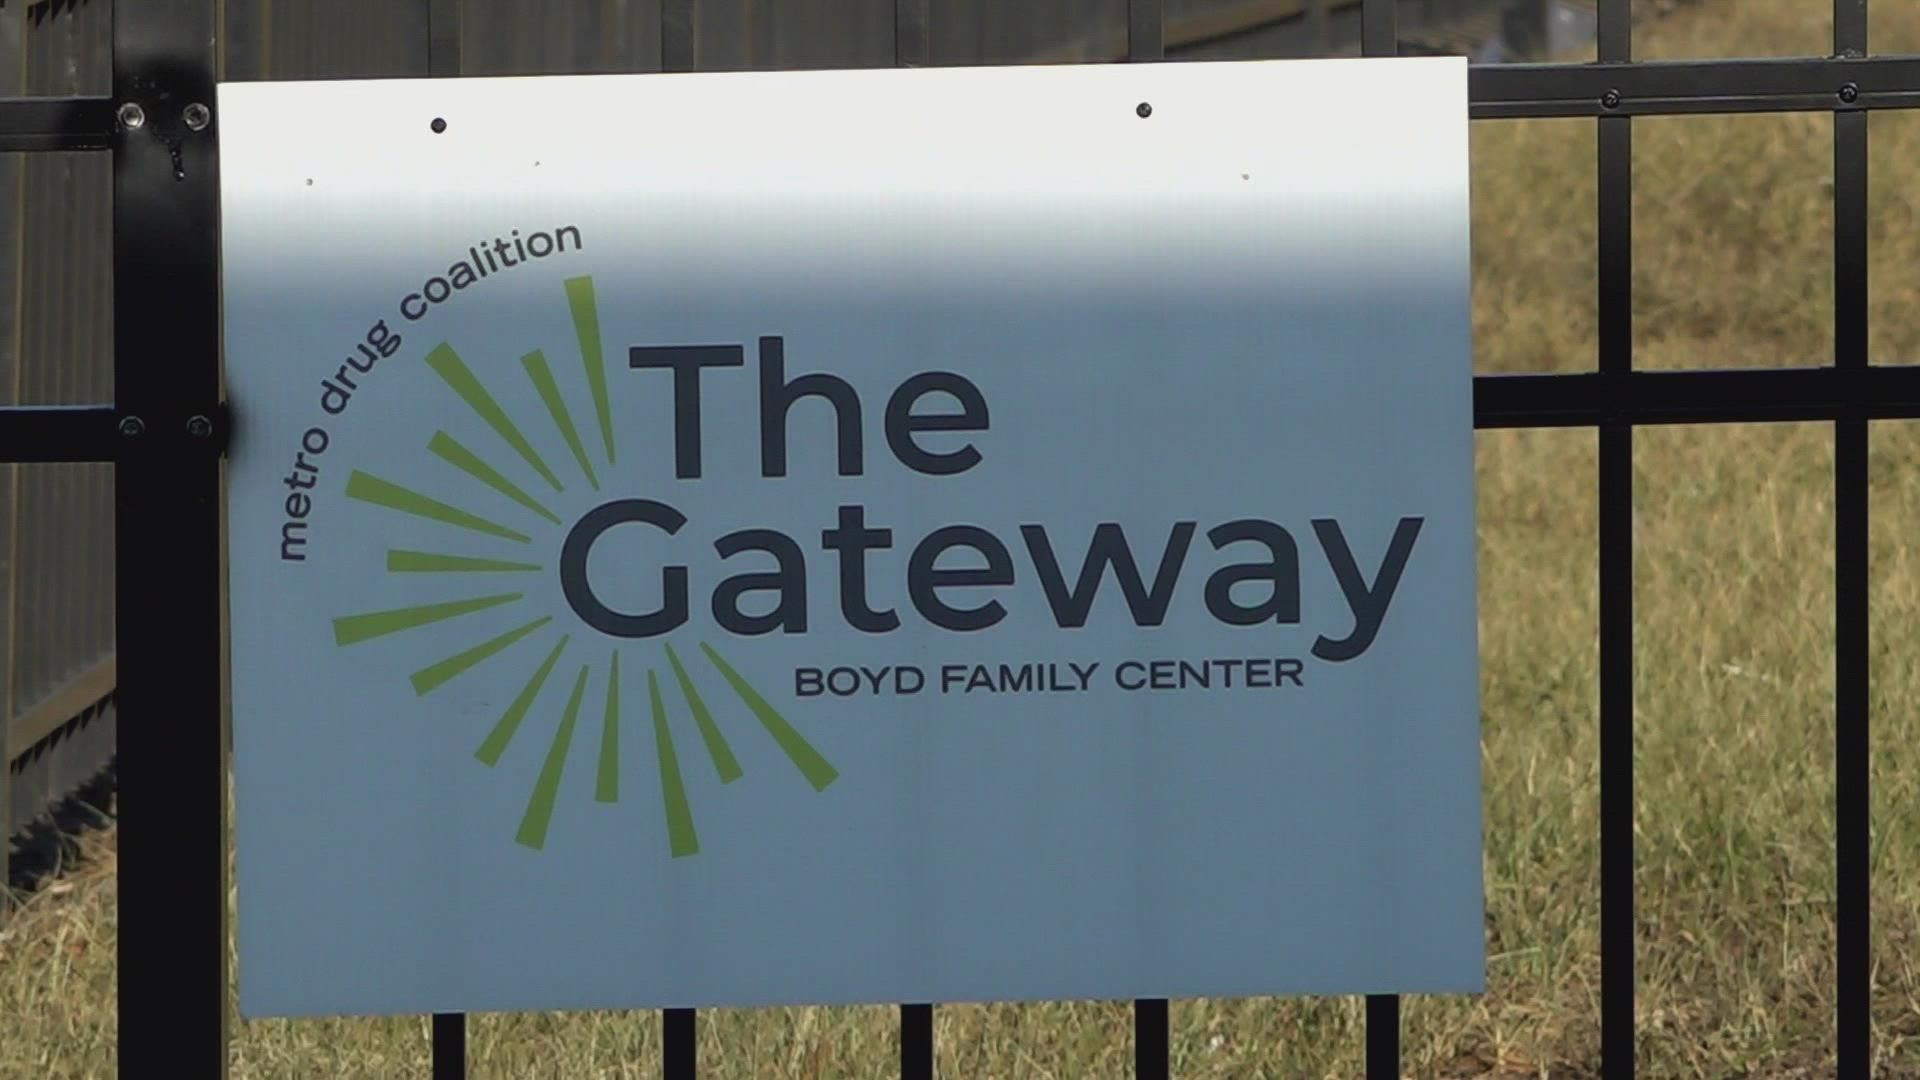 The Metro Drug Coalitions' Gateway served 3,036 people since its opening in September 2022.